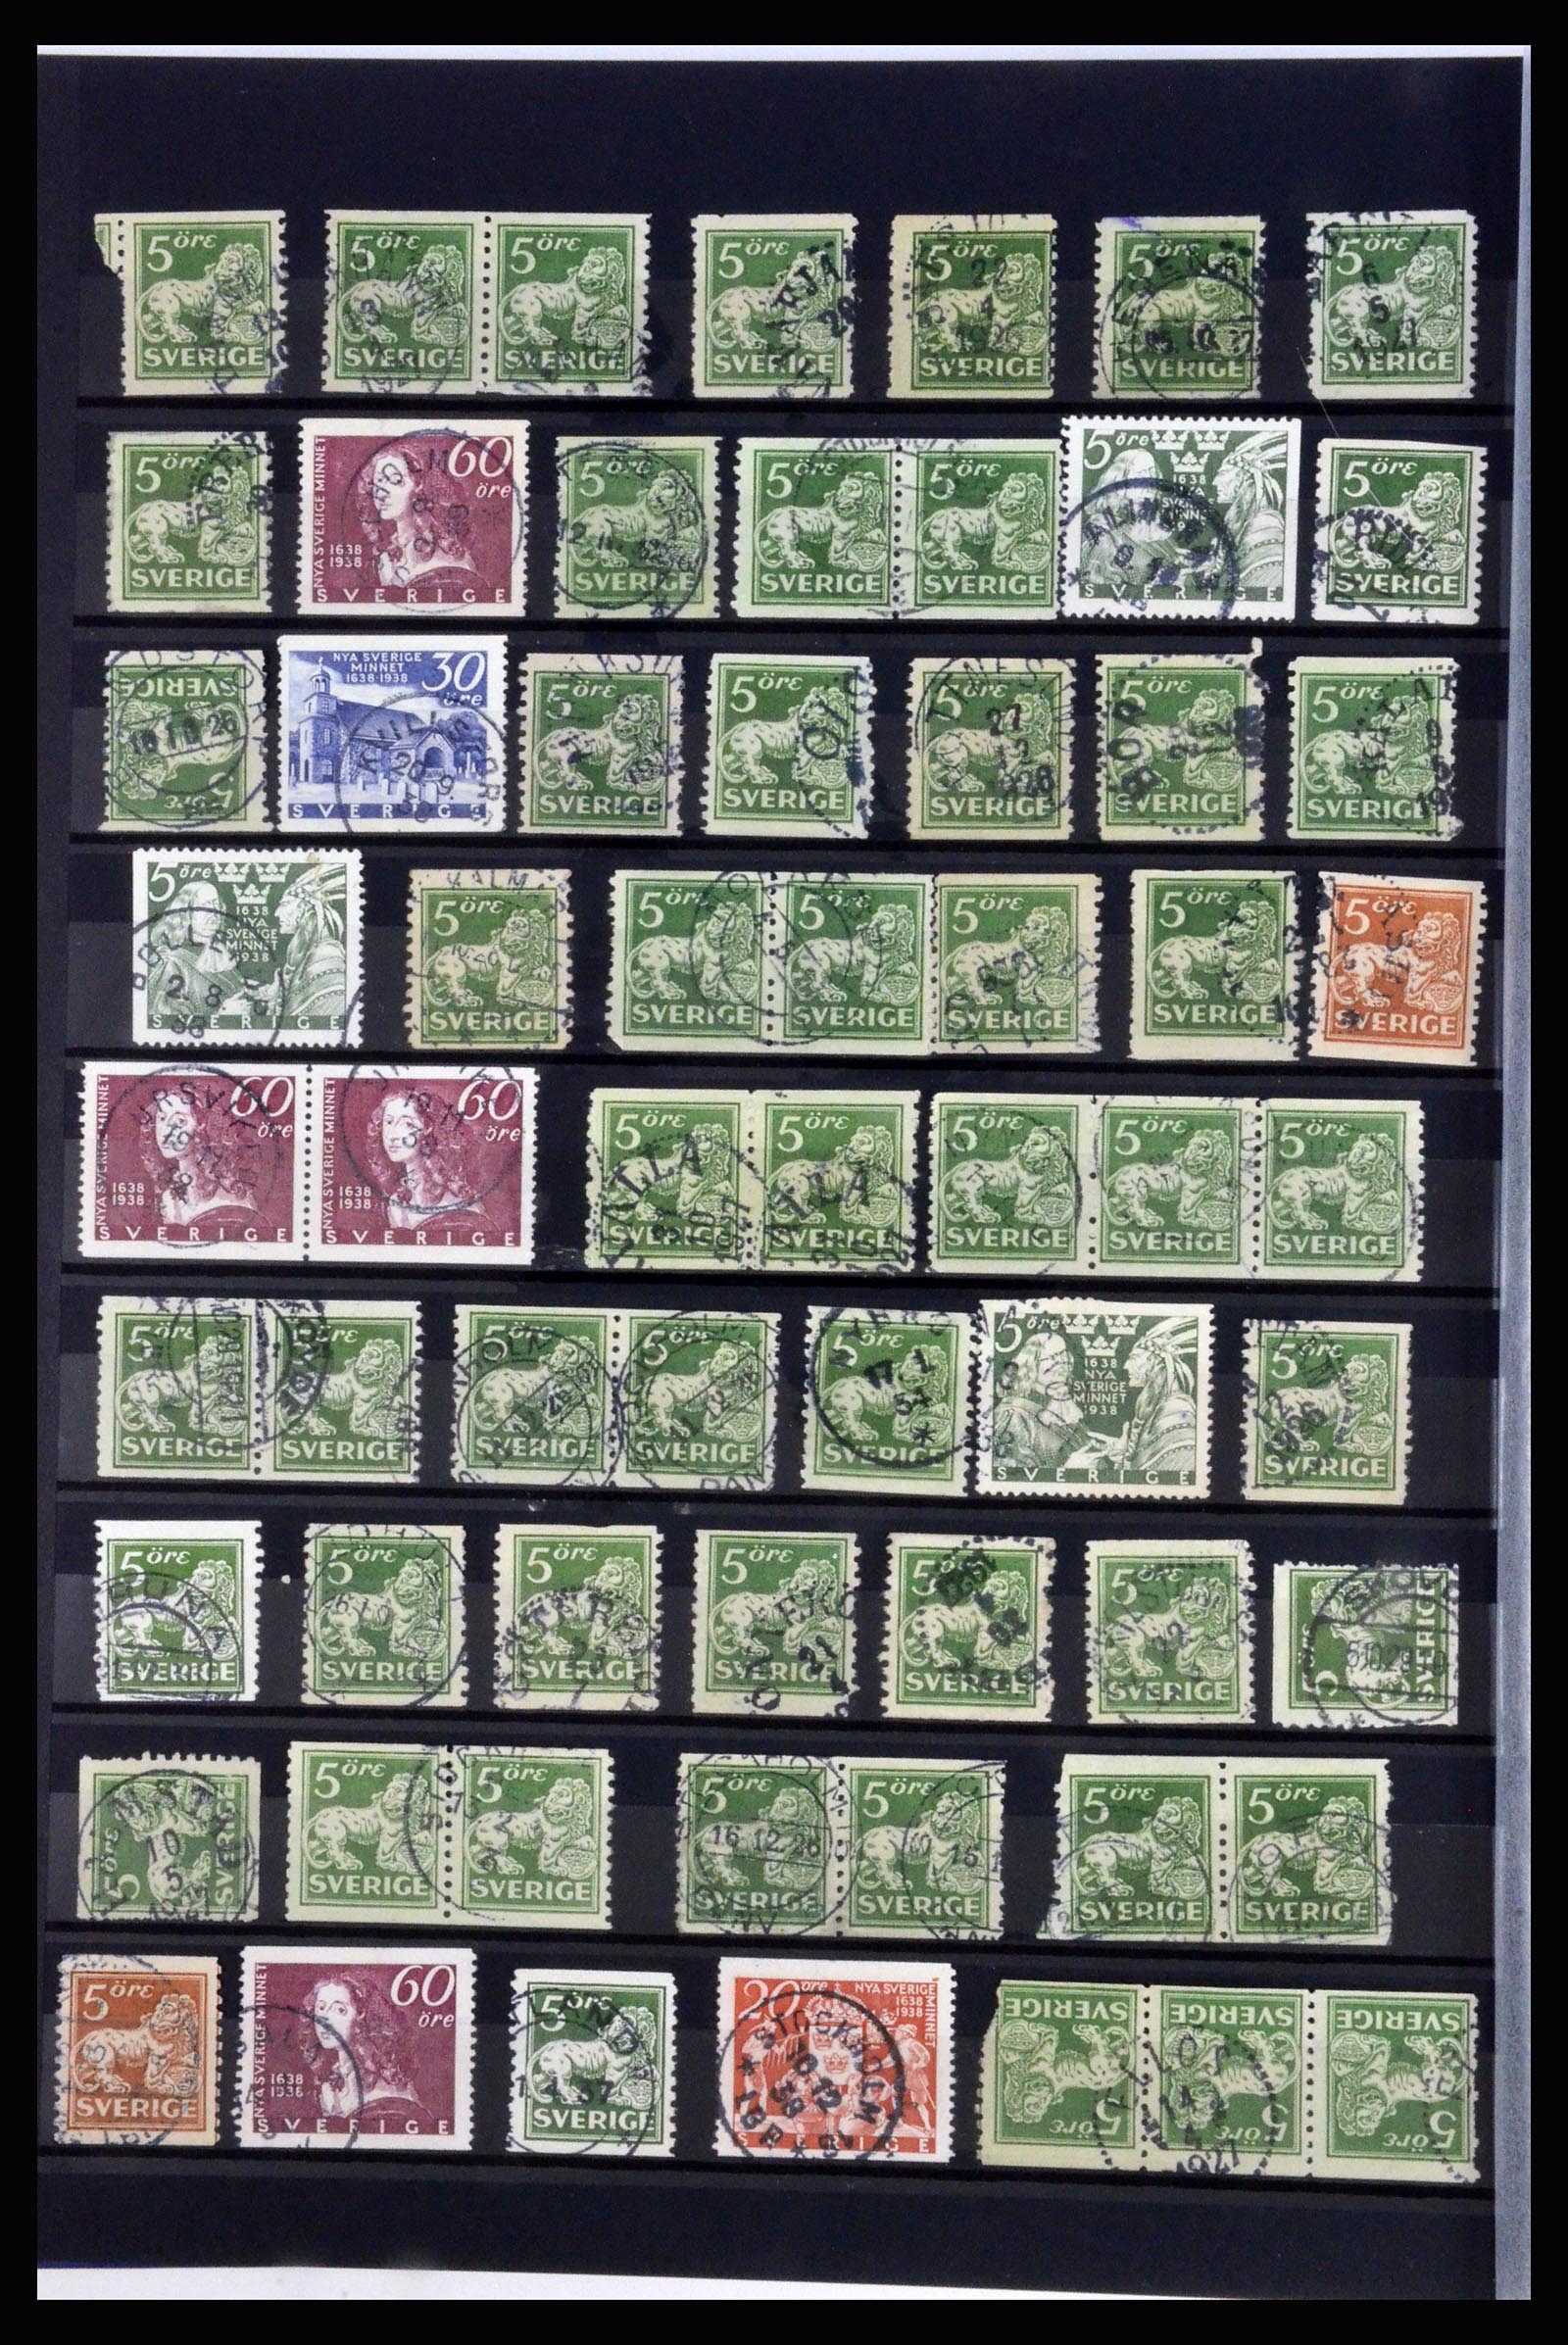 36316 024 - Stamp collection 36316 Sweden cancellations 1920-1938.